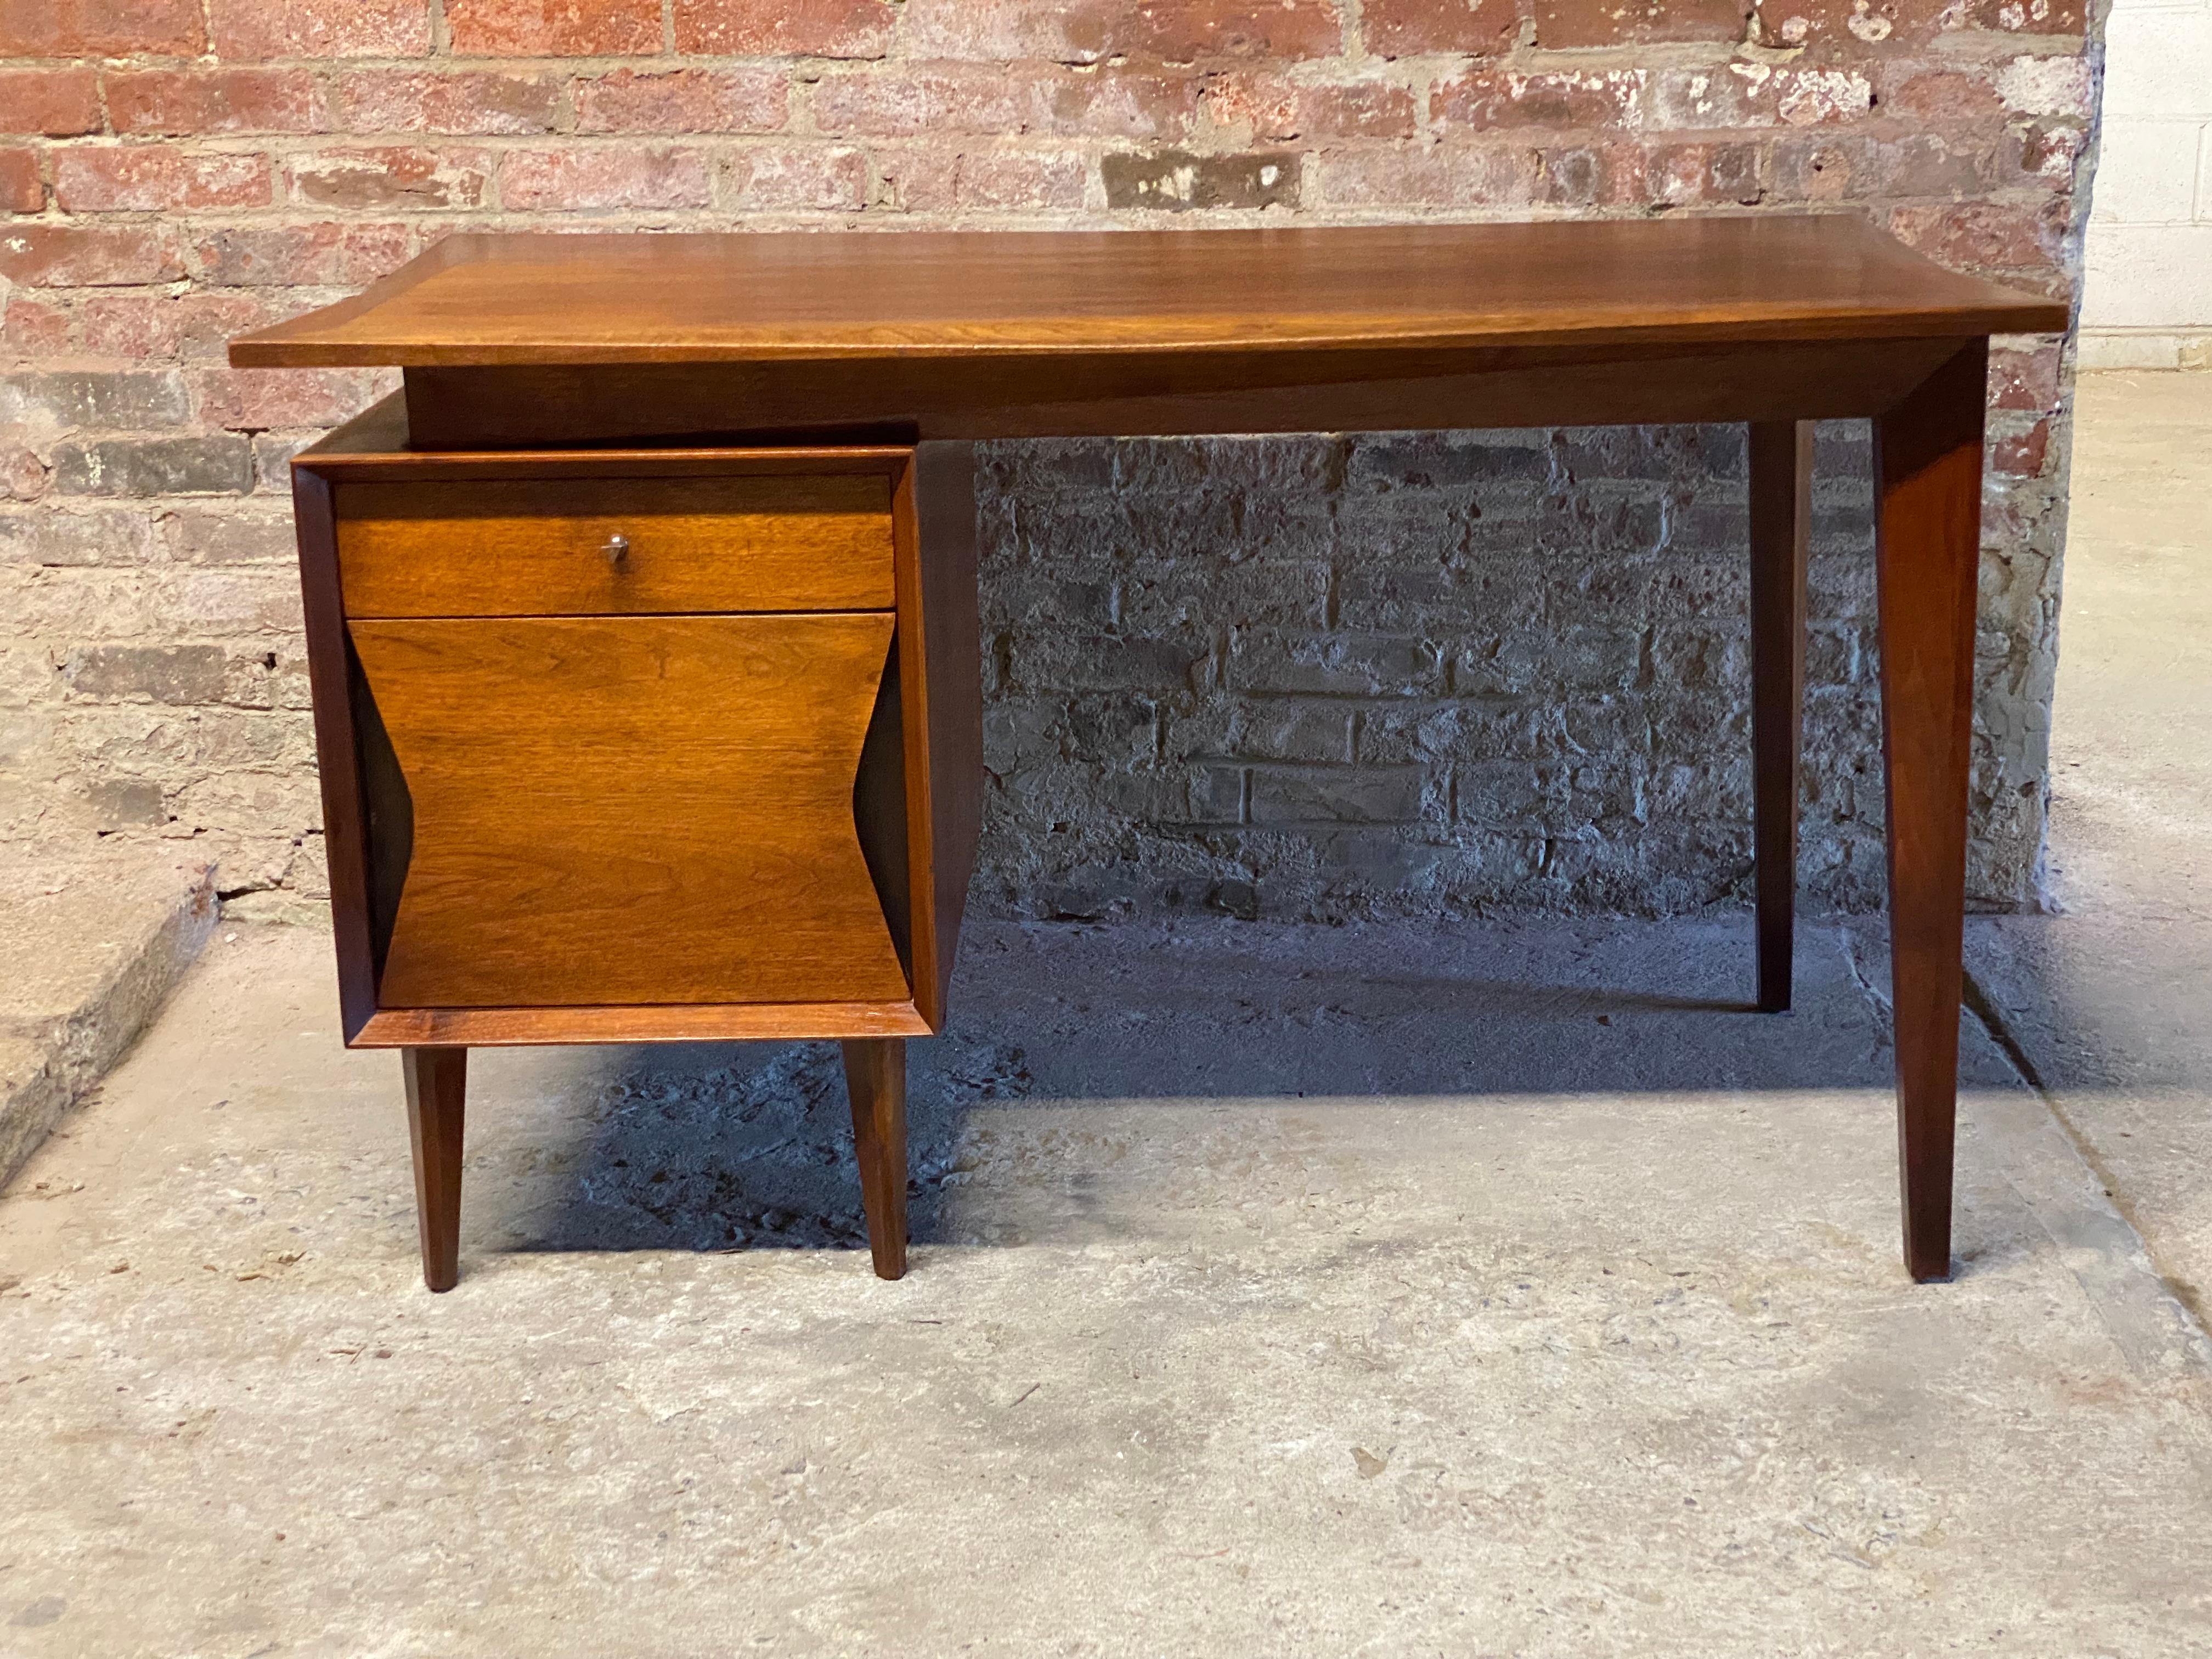 Roomy and commodious Walnut desk featuring a slightly beveled edge and apron, faceted tapered legs and ebonized accent detail surrounding the bottom drawer. The bottom drawer can be used for deep storage or hanging files. Circa 1960. Finished on all